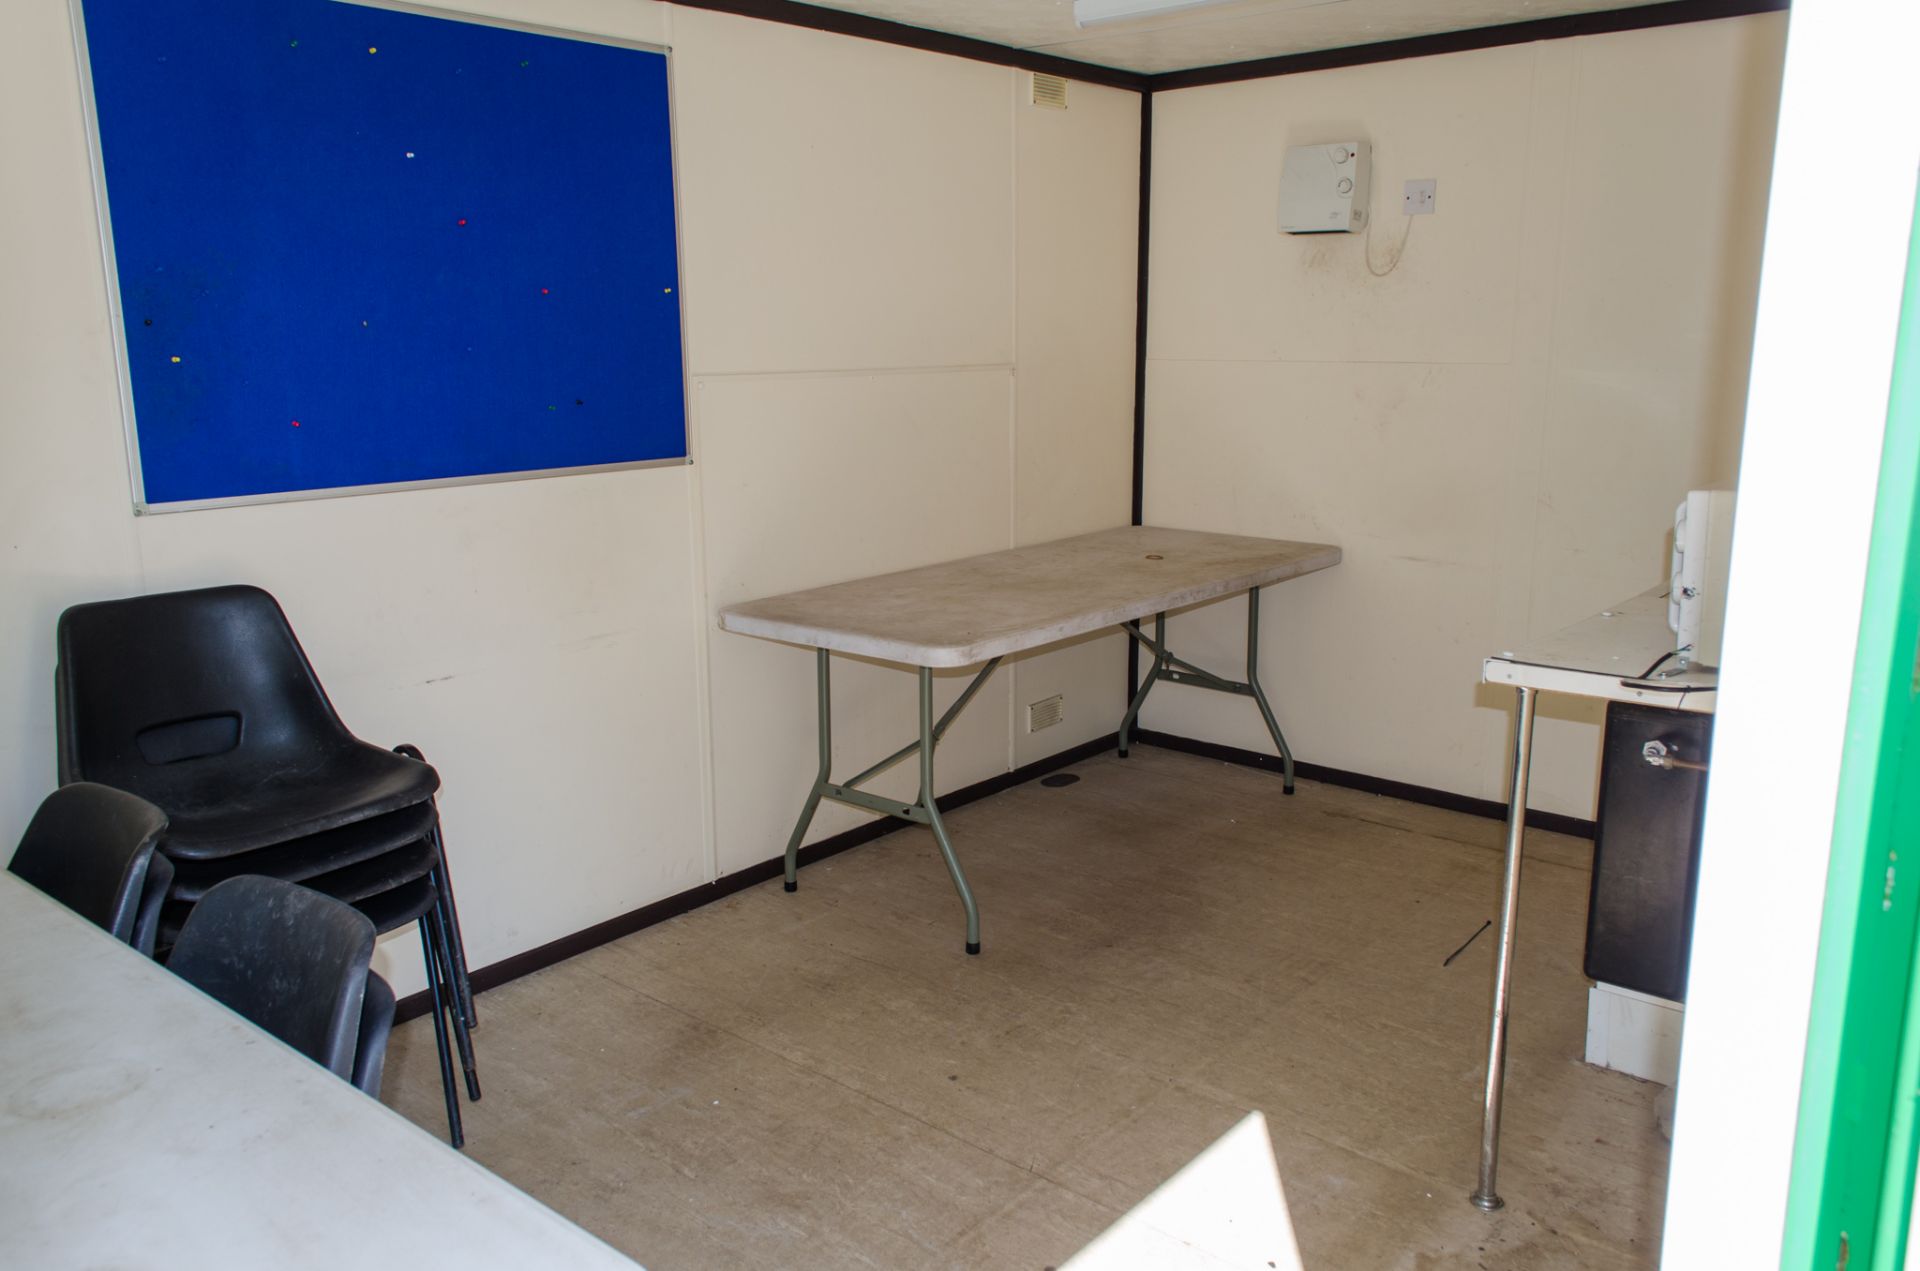 21 ft x 9 ft steel anti vandal welfare site unit Comprising of: canteen area, toilet & generator - Image 5 of 10